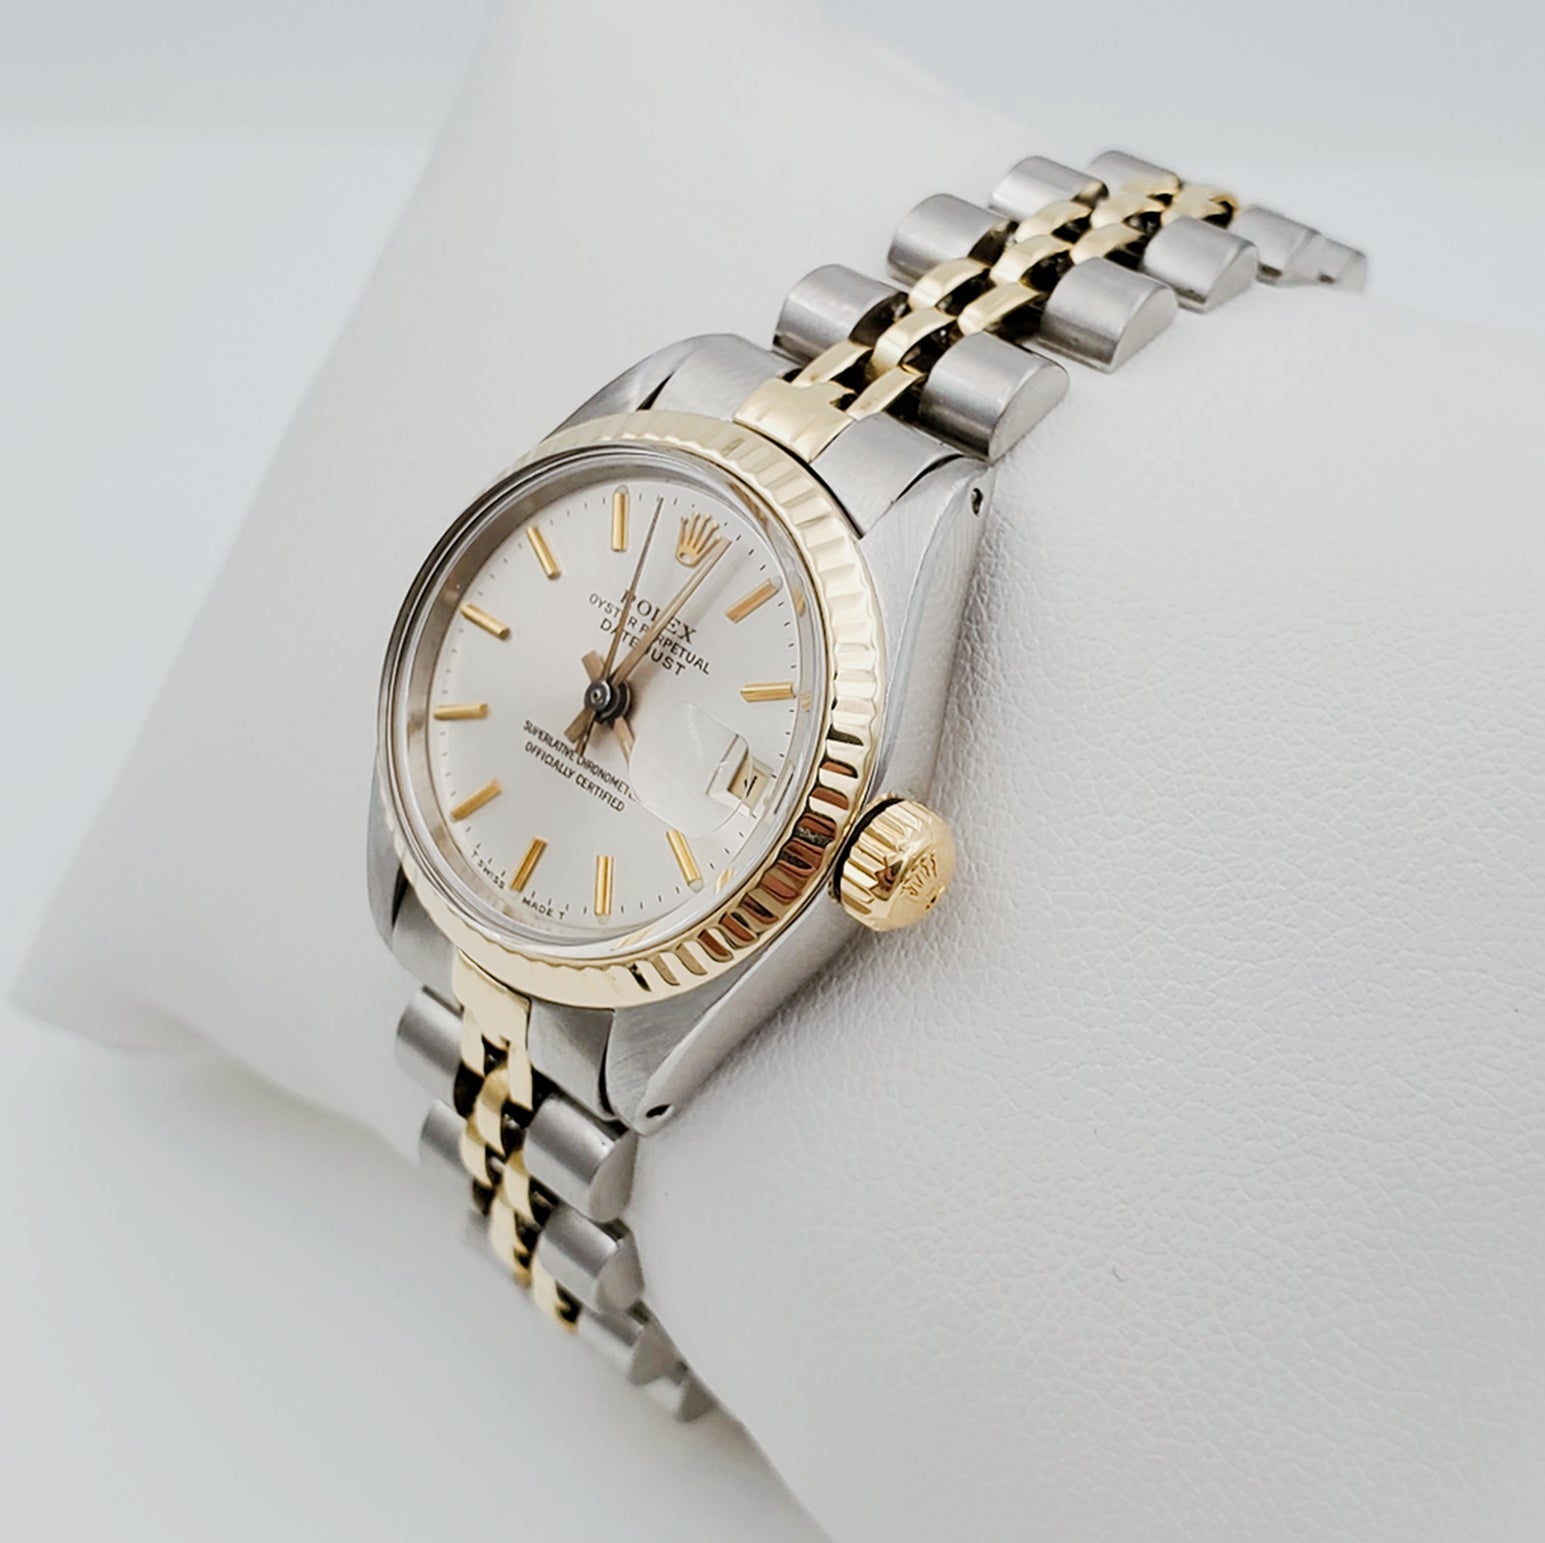 Women's Rolex DateJust 26mm Two-Tone 14K Gold / Stainless Steel Watch with Silver Dial and 14k Fluted Bezel. (Pre-Owned)